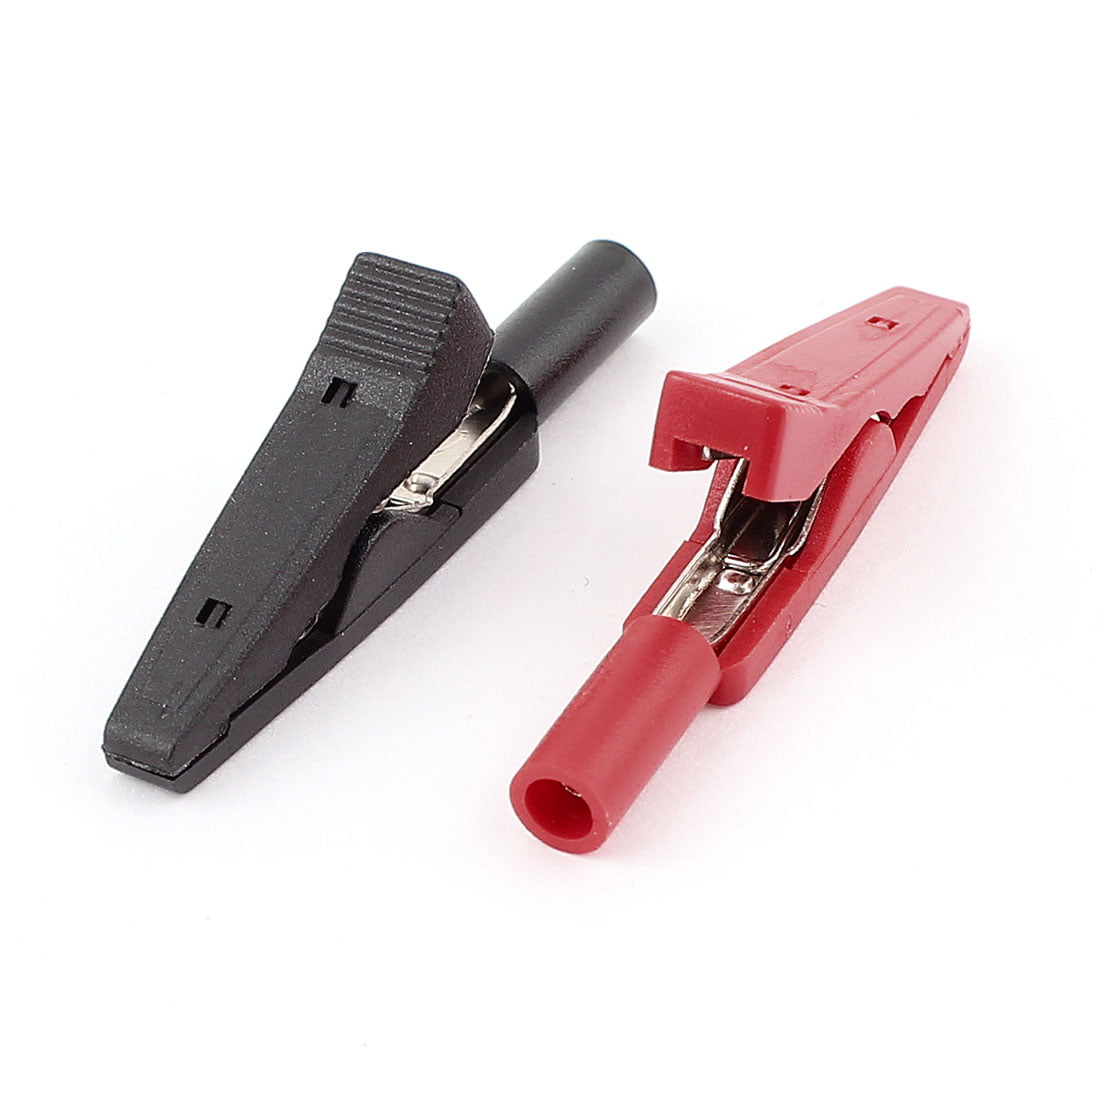 2X Red Black Alligator Clip Clamp to 4mm Banana Female Jack Test Adapter 55mm h$ 